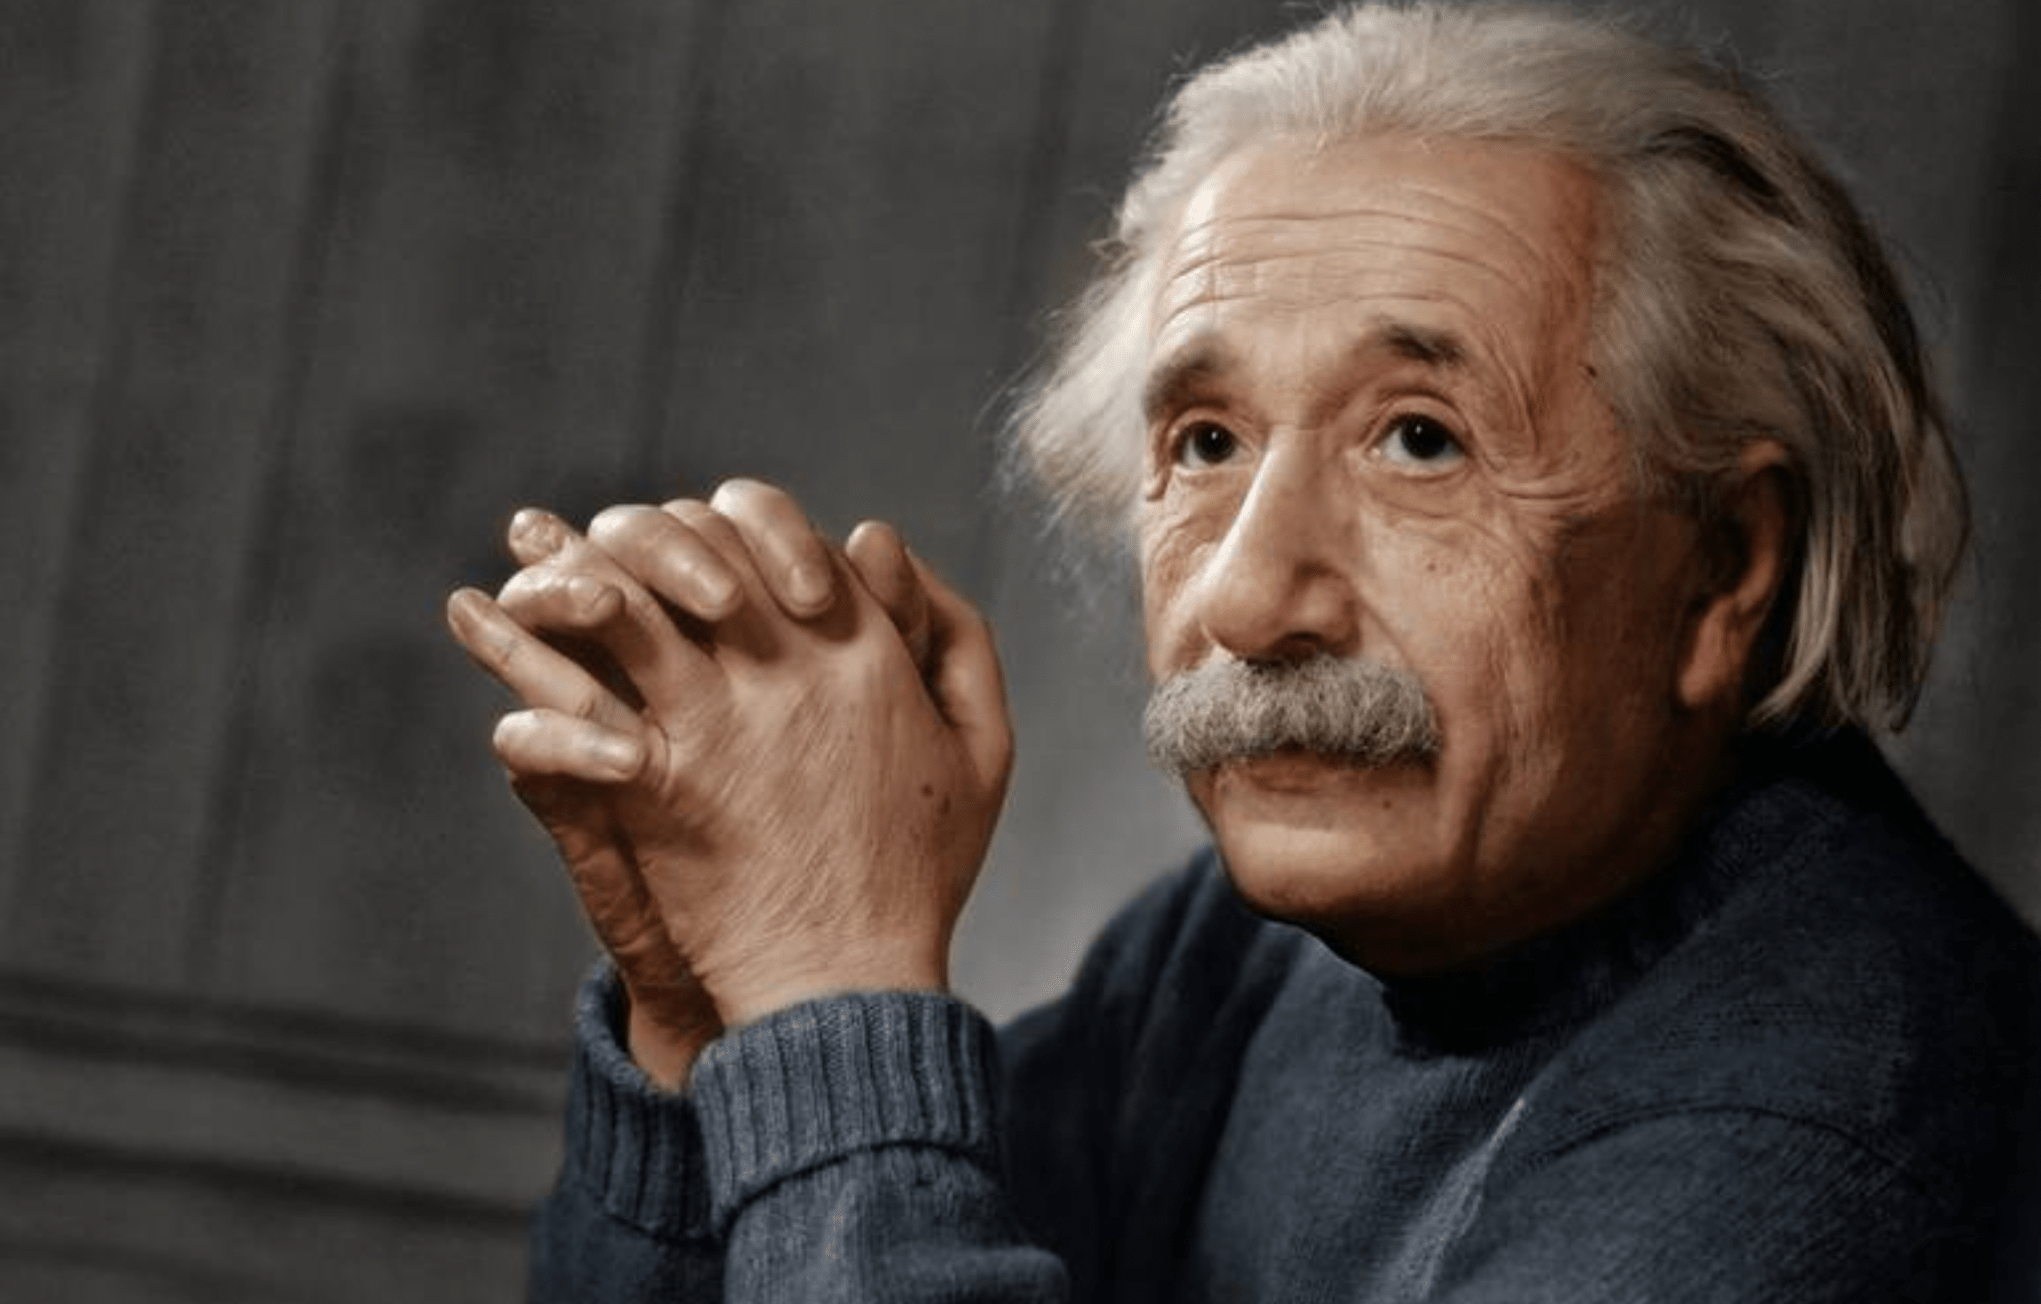 what is einsteins theory of special relativity and when was the theory proposed by albert einstein